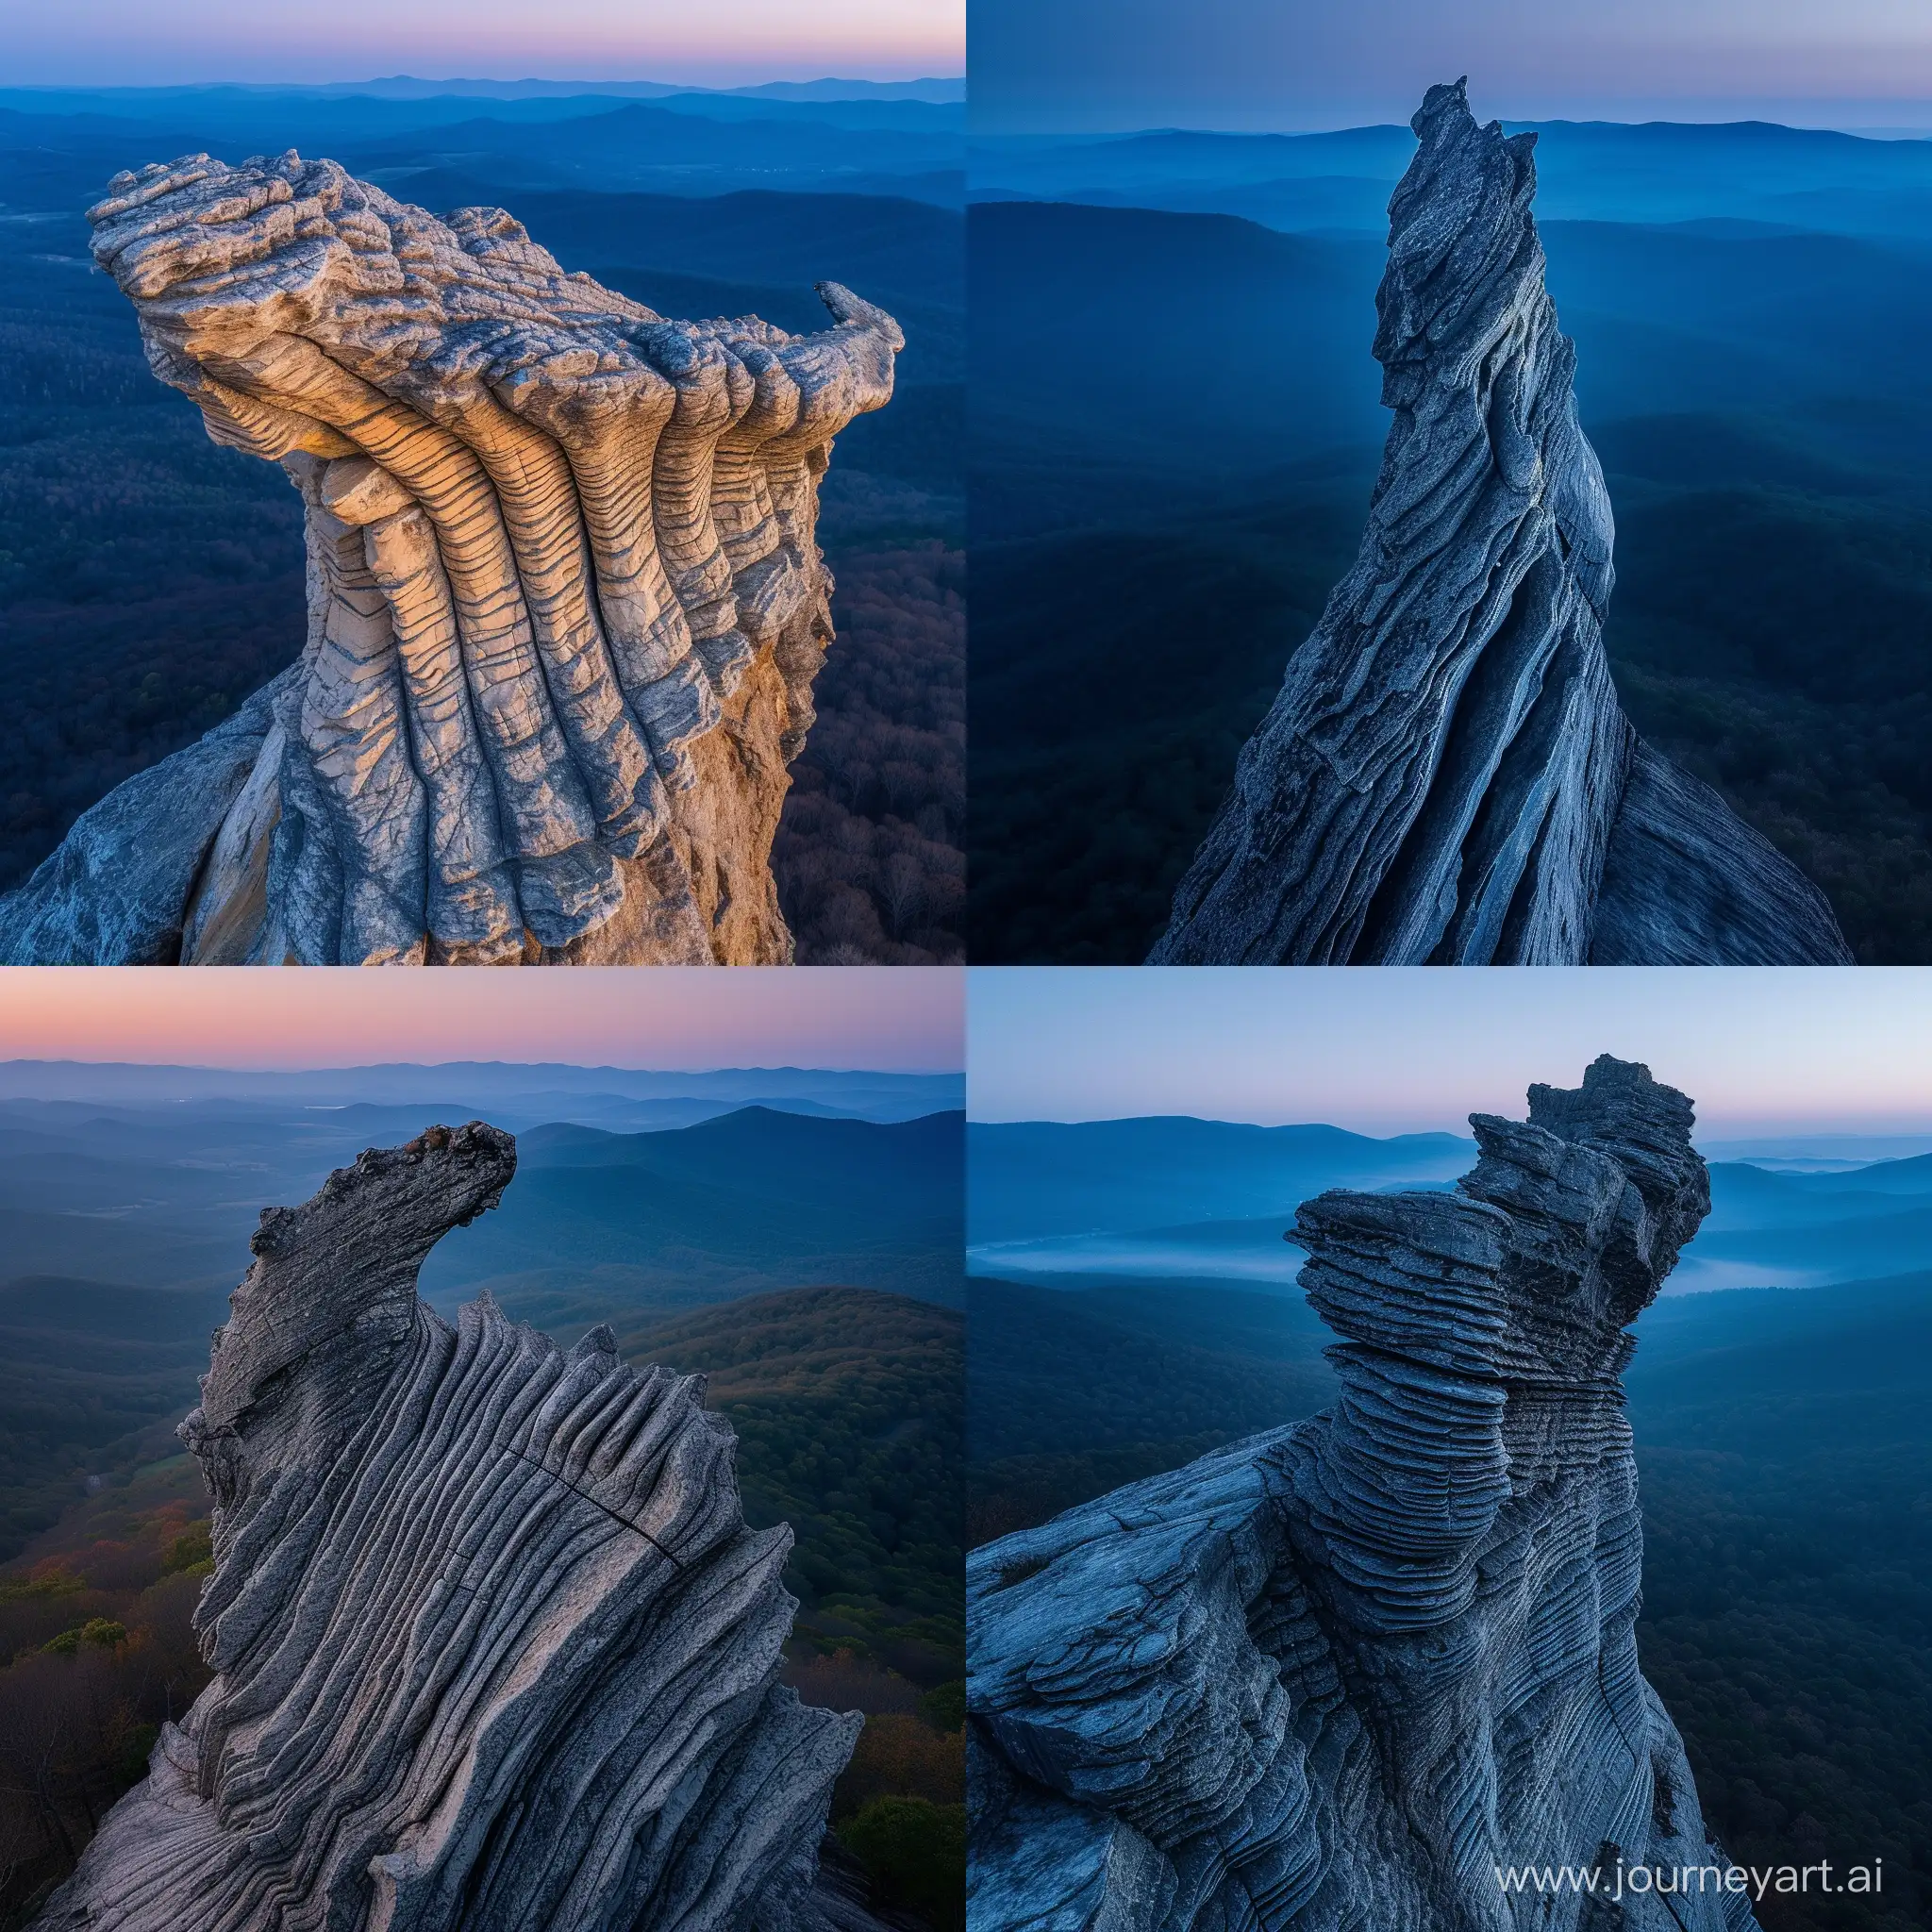 photo of humpback rock outcrop, outcrop looks exactly like a breaching humpback whale, head shape and front fin shape visible with striations on the ventral pleats, virginia, rolling blue ridge mountains in the background fading into deep blue, drone photography looking at the outcrop, morning, crisp, award winning landscape, sunrise, beautiful, gently lit by the sunrise